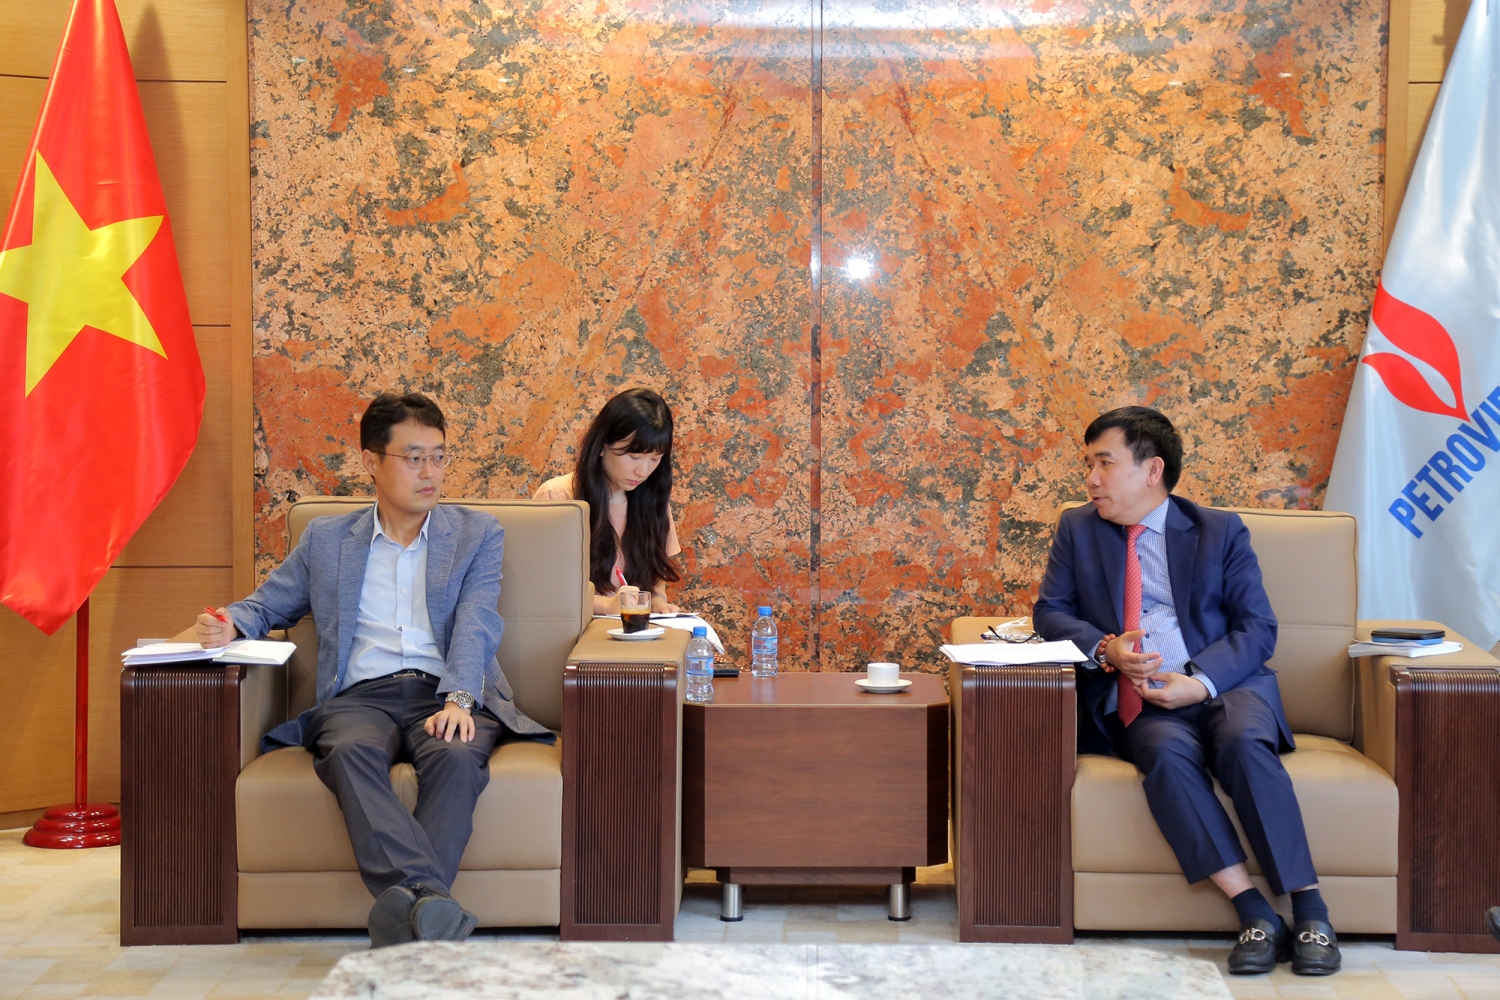 Petrovietnam is willing to expand cooperation with Korean businesses